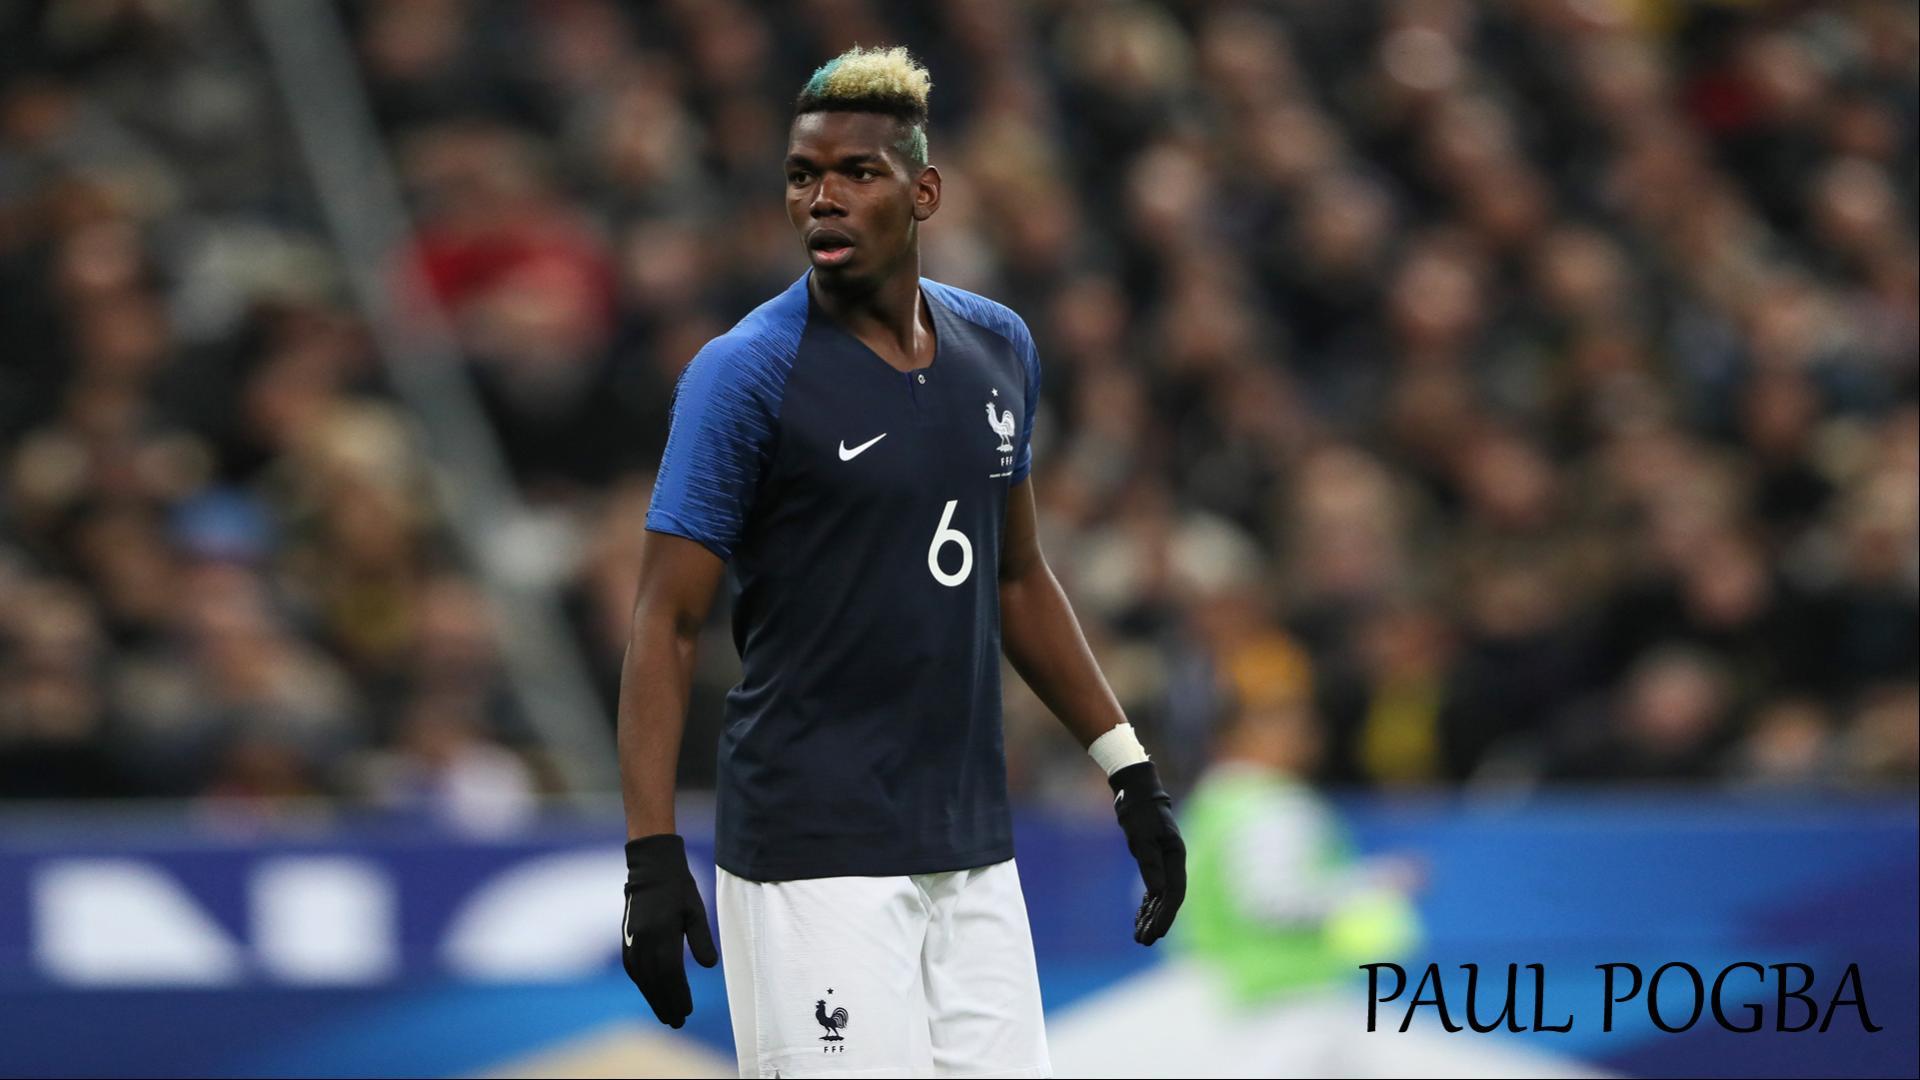 1920 x 1080 · jpeg - Paul Pogba with 2018 France Football Team Jersey for World Cup - HD ...